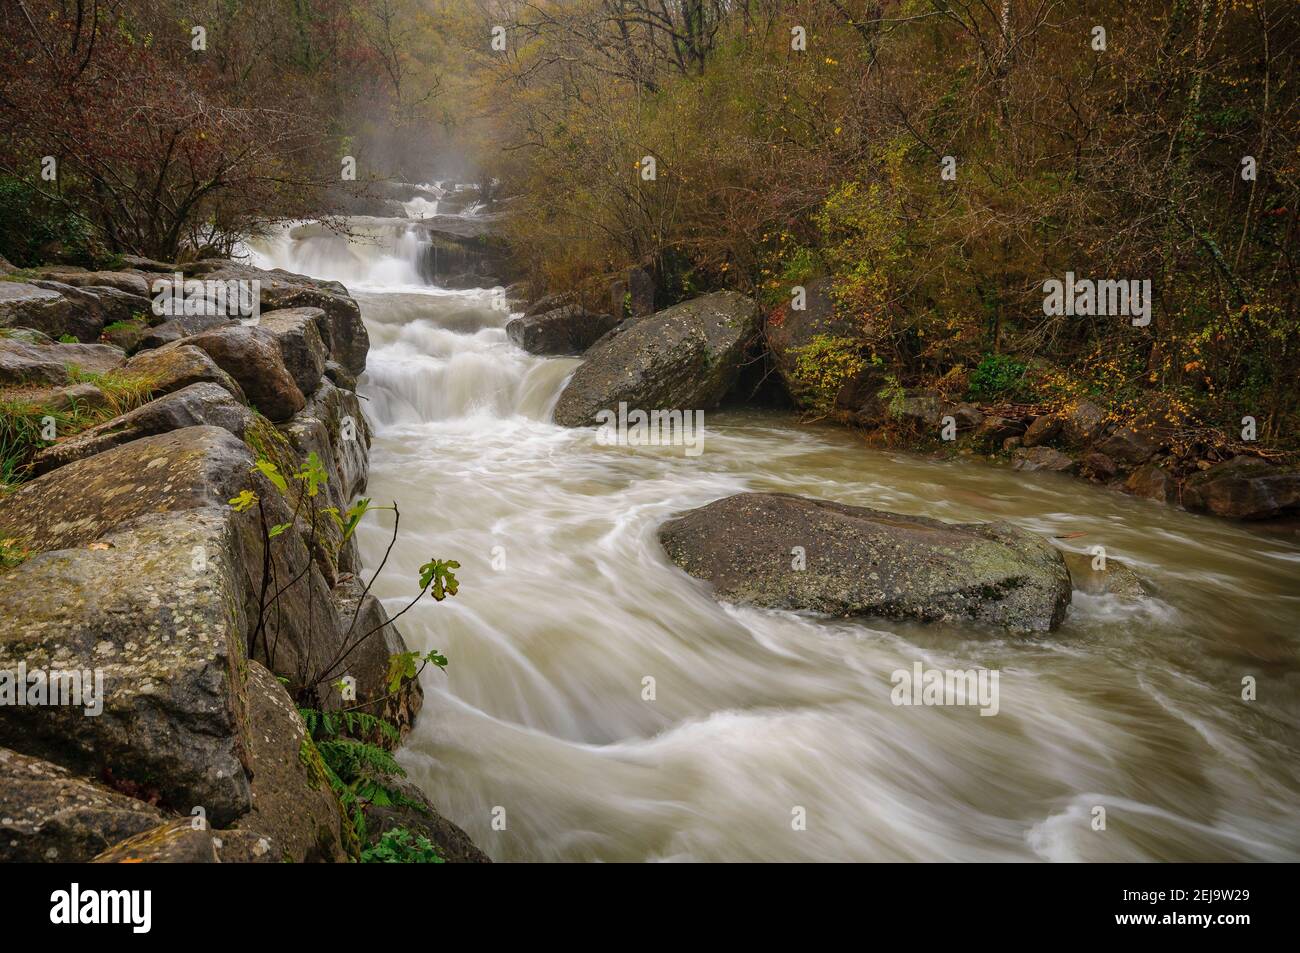 The river Gurn in the picnic area of Els Pins, after heavy rains (Vall d'en Bas, Garrotxa, Catalonia, Spain, Pyrenees) Stock Photo